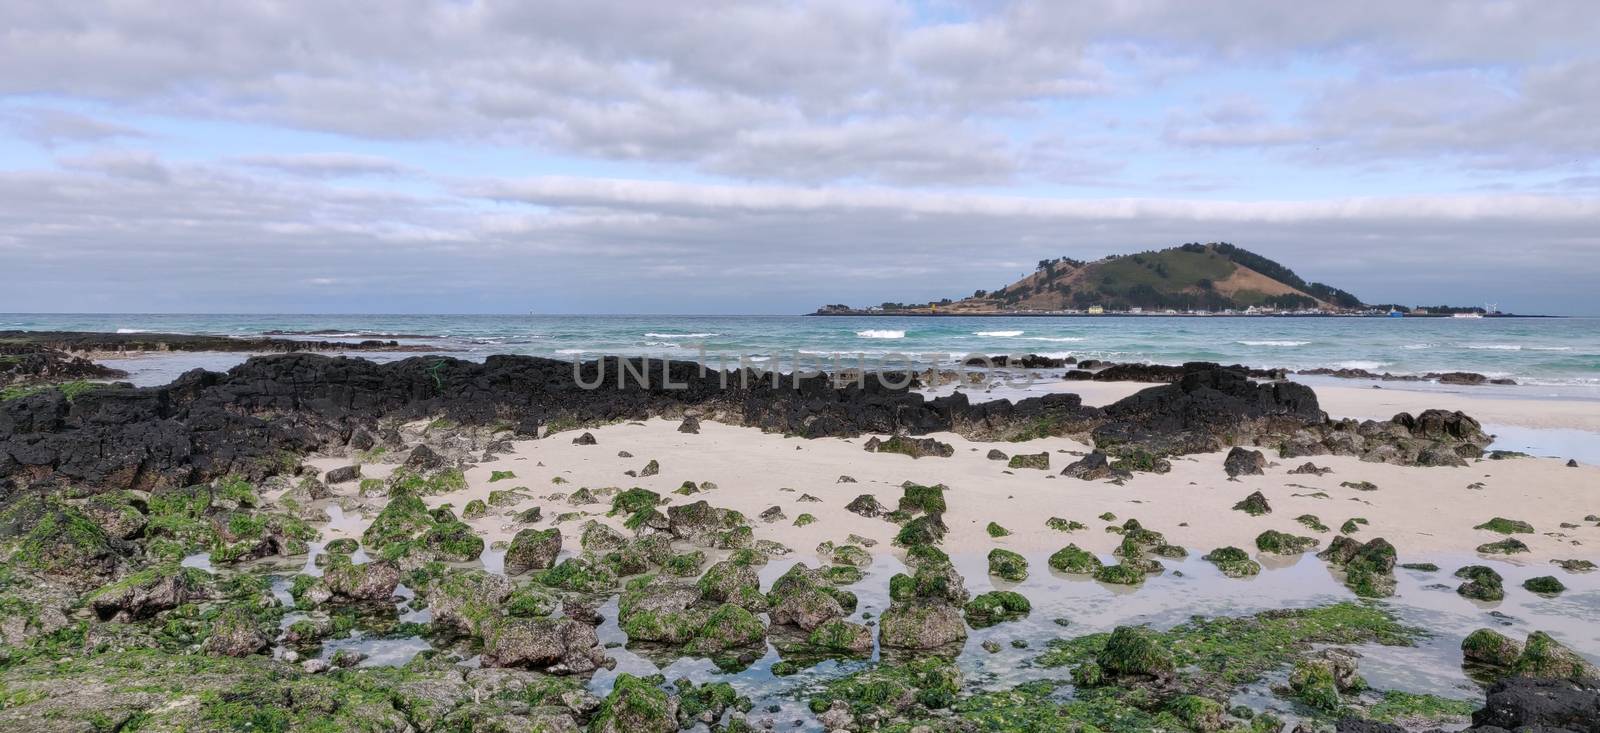 Volcanic rock on the shore of sand beach covered in green algae on Hyeopjae beach with mountain and cobalt blue sea in Jeju Island, South Korea